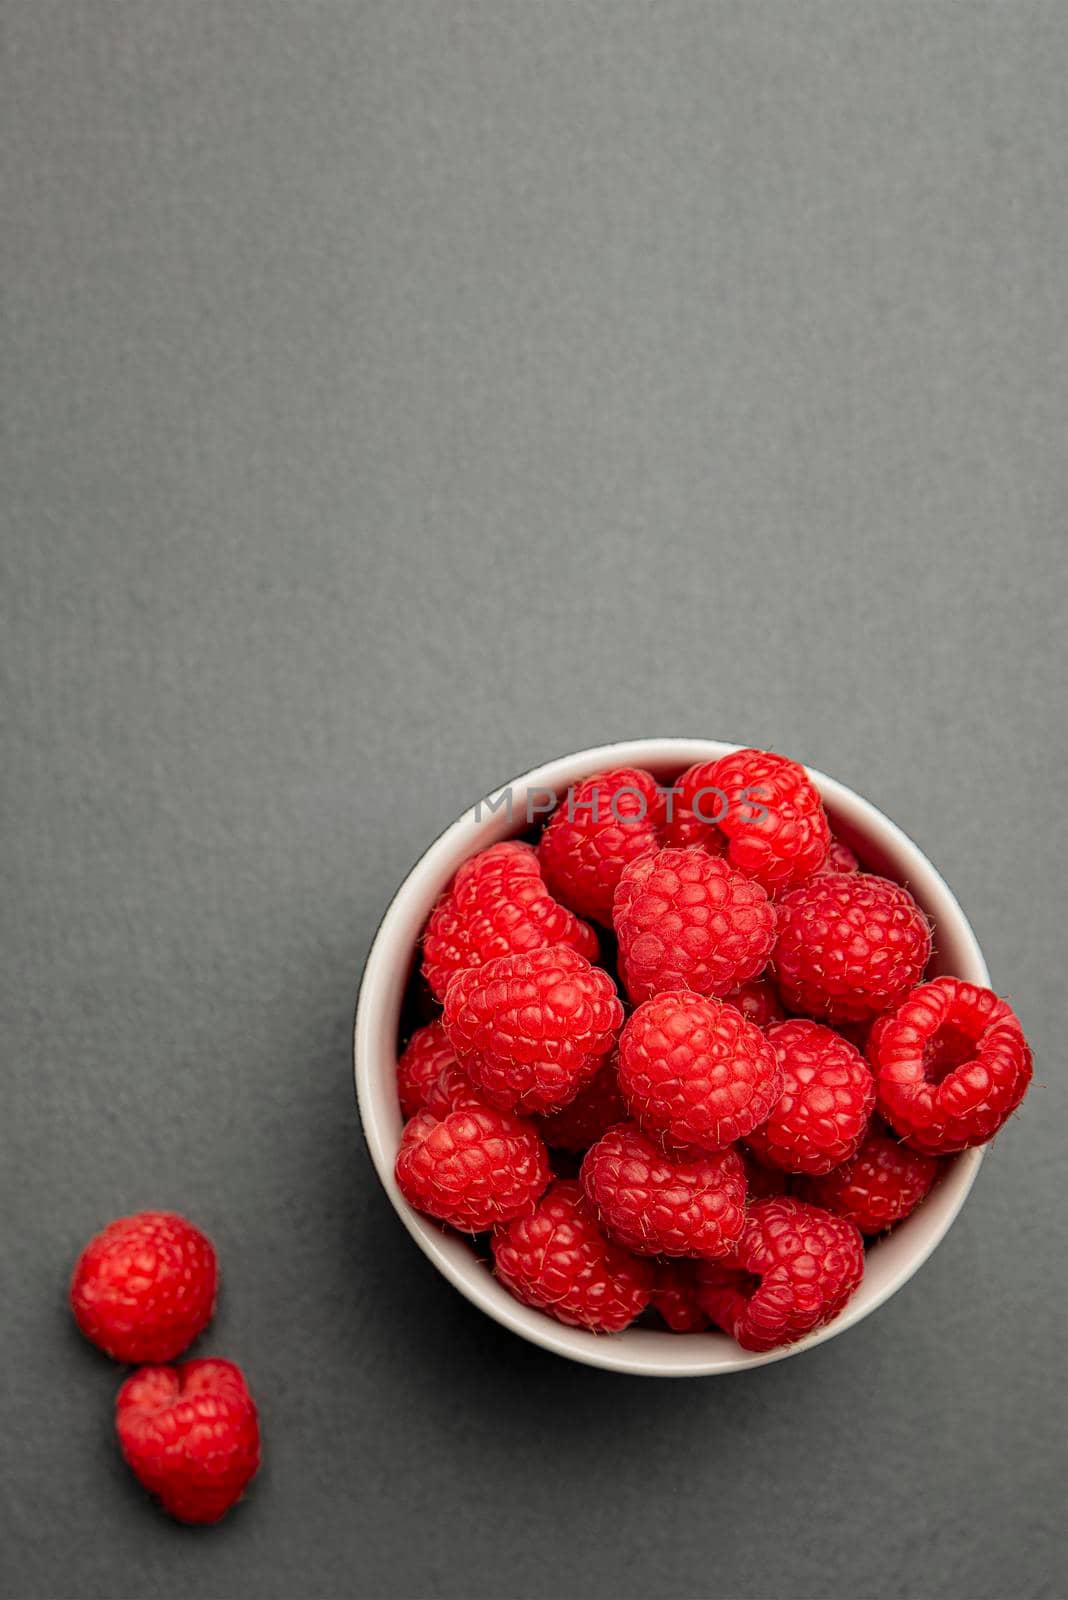 Fresh juicy raspberries in a small black plate. Bright red crimson close-up. Summer berry picking time. Healthy organic fruits for kids. Vertical photo by SERSOL